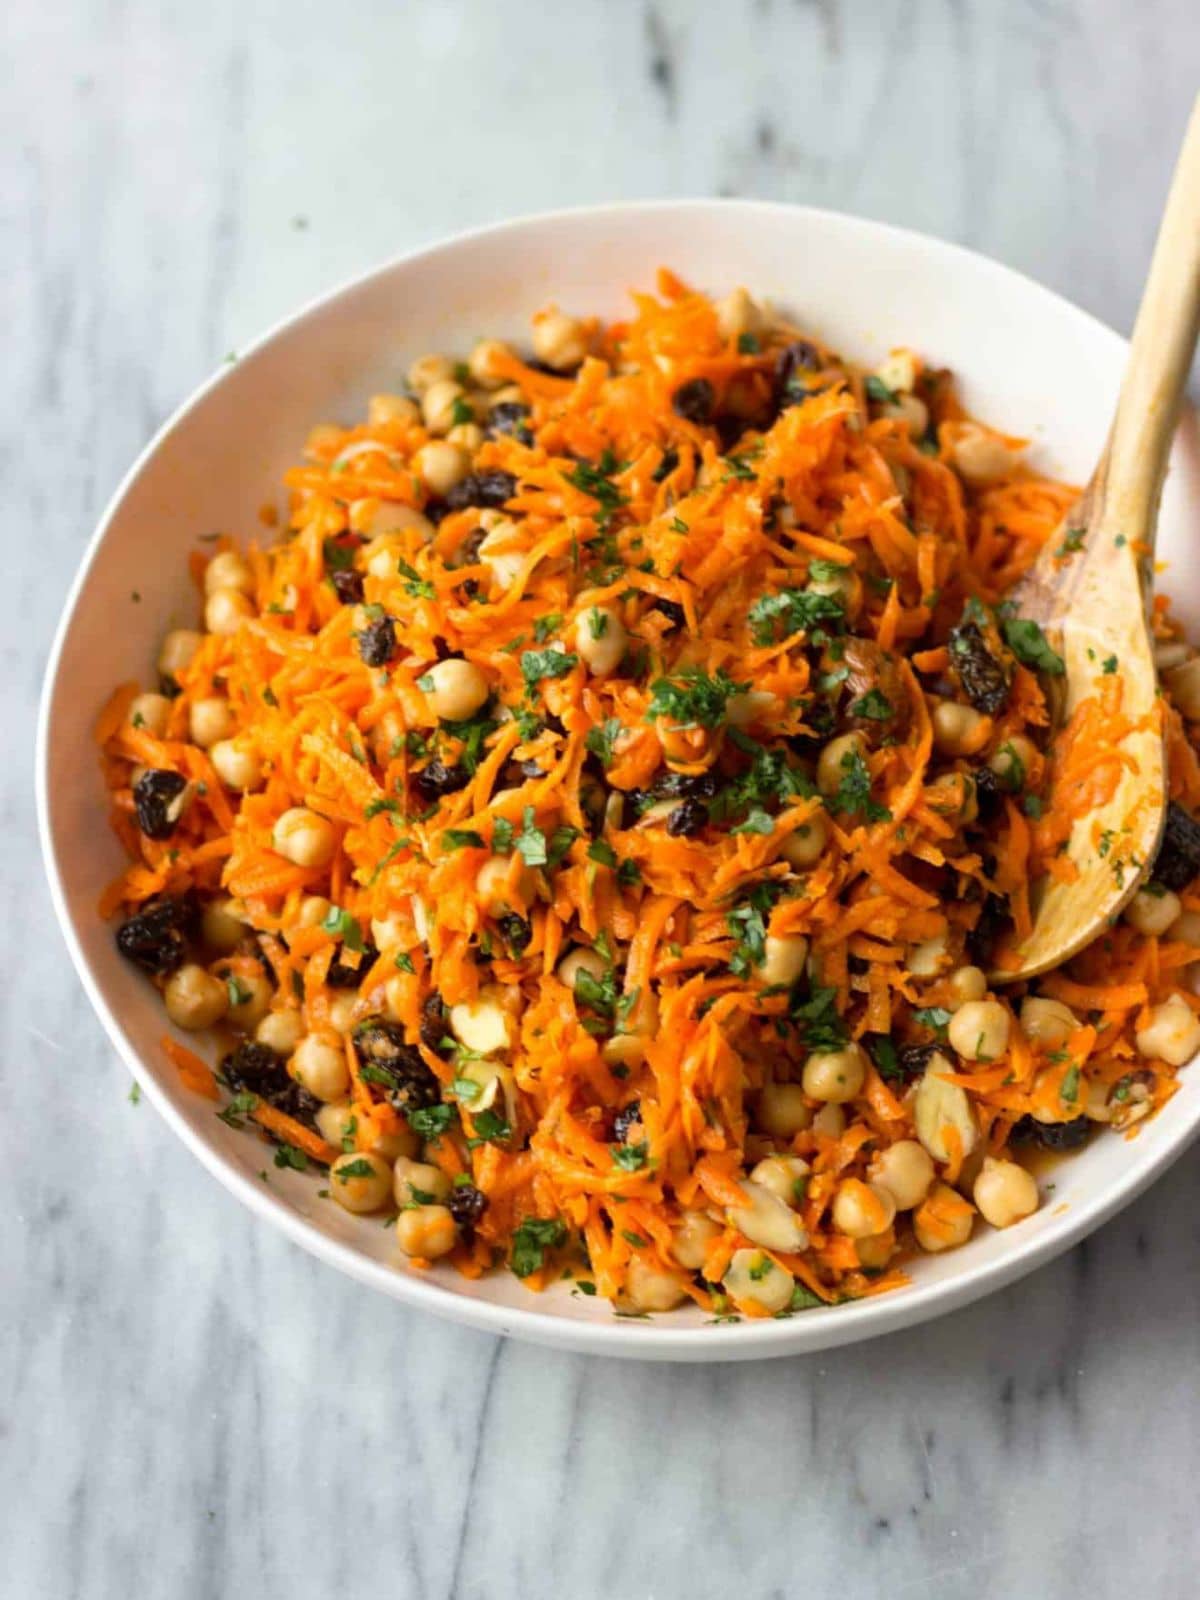 Carrot chickpea salad in a white bowl and a wooden salad spoon on a marble tabletop